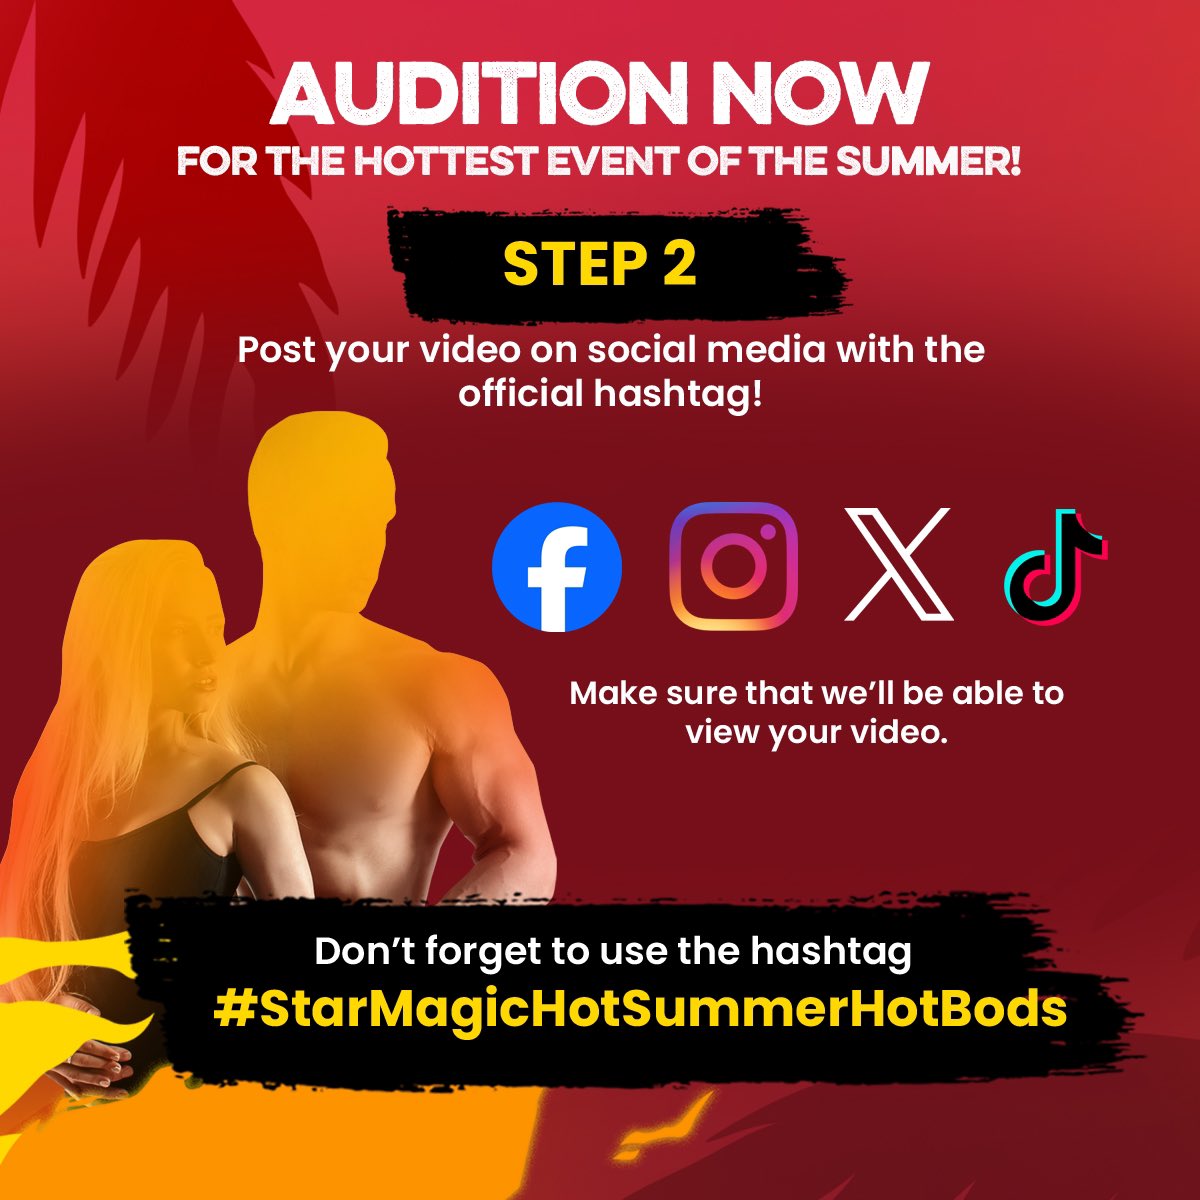 🚨 AUDITION NOW for summer’s hottest event! 🚨

Post a video showcasing your hot bod & personality with the hashtag #StarMagicHotSummerHotBods on FB, IG, X, TikTok, and be one of the event’s faces—and bodies—along with Star Magic artists!

You have until April 12 to upload your…